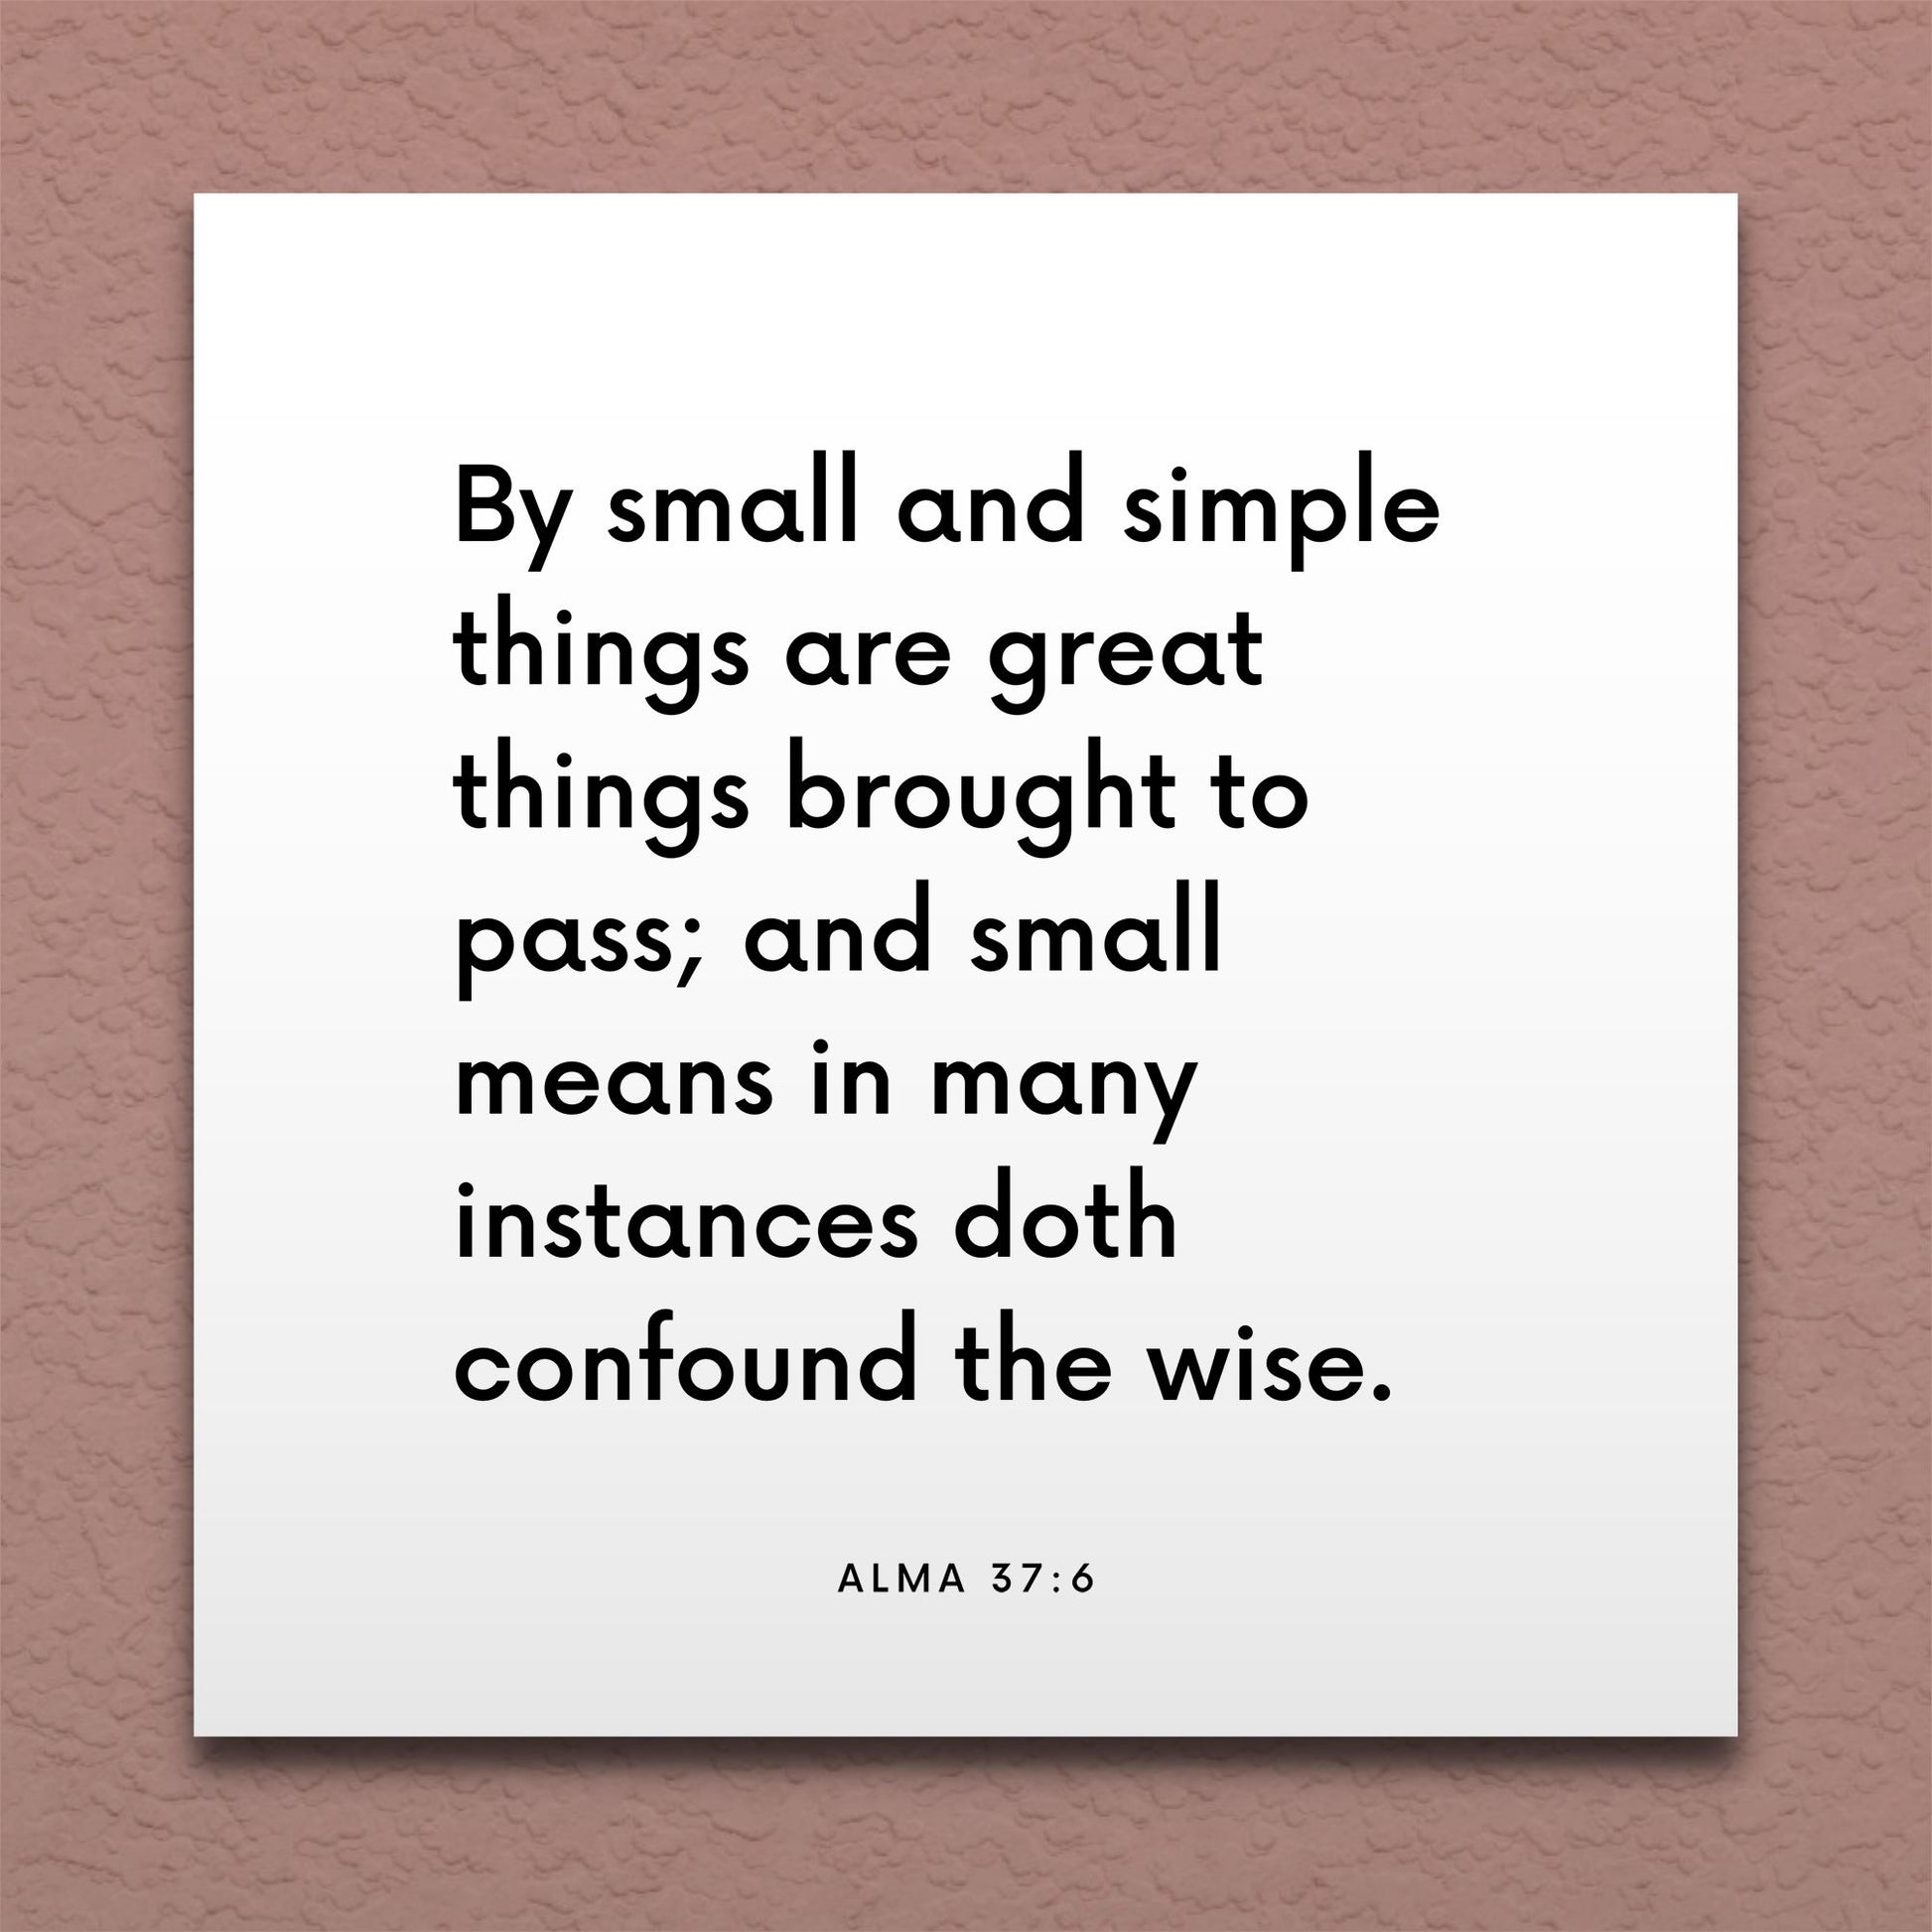 Wall-mounted scripture tile for Alma 37:6 - "By small and simple things are great things brought to pass"